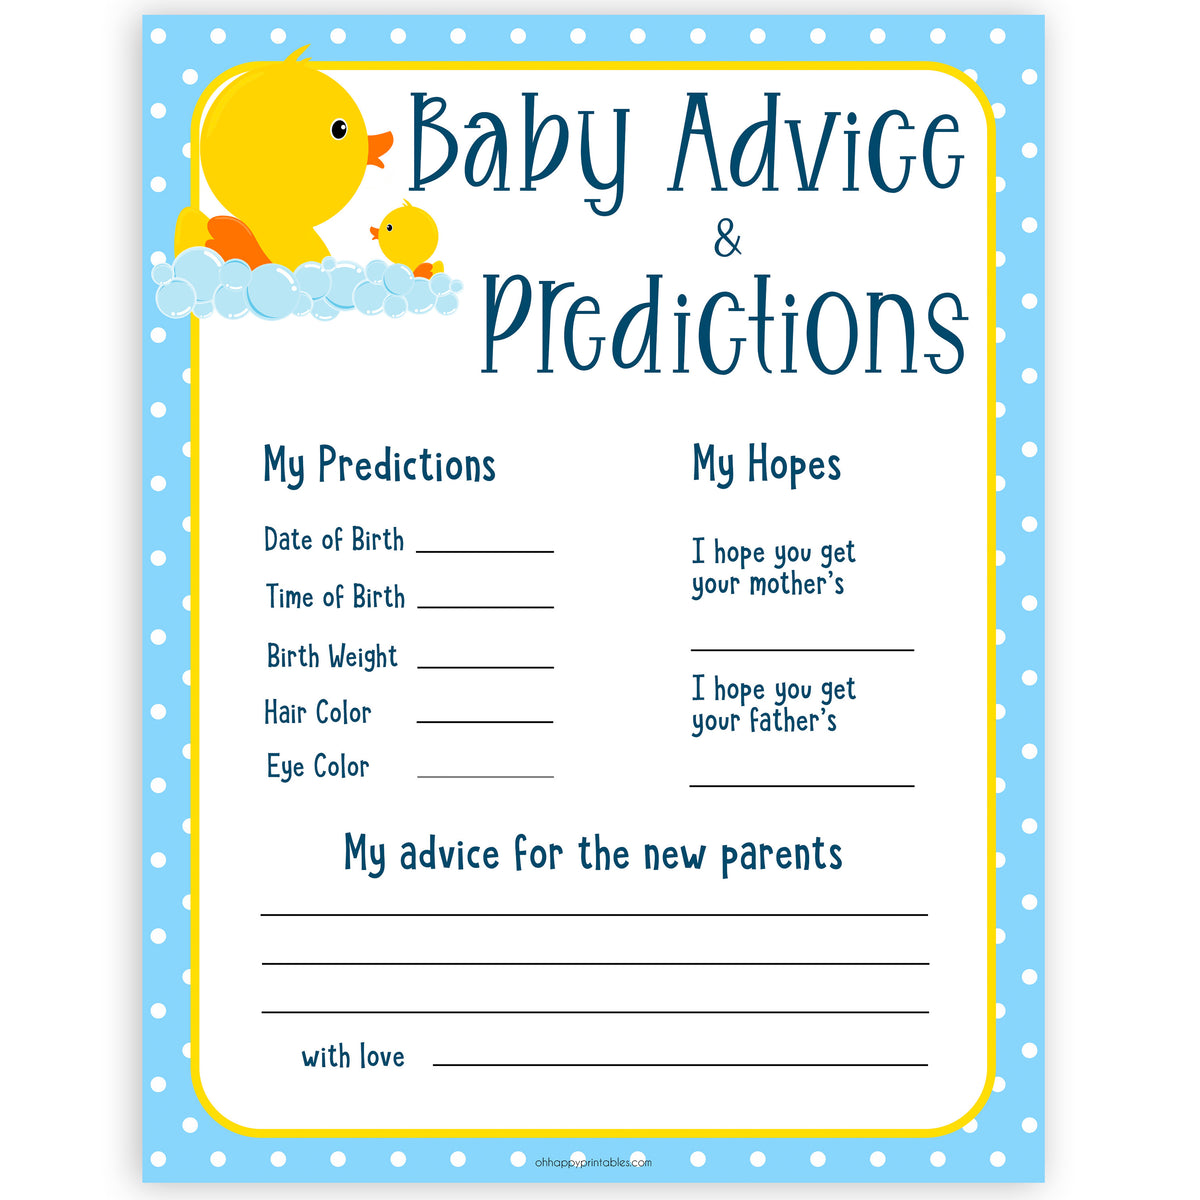 new-baby-advice-predictions-card-rubber-ducky-printable-baby-games